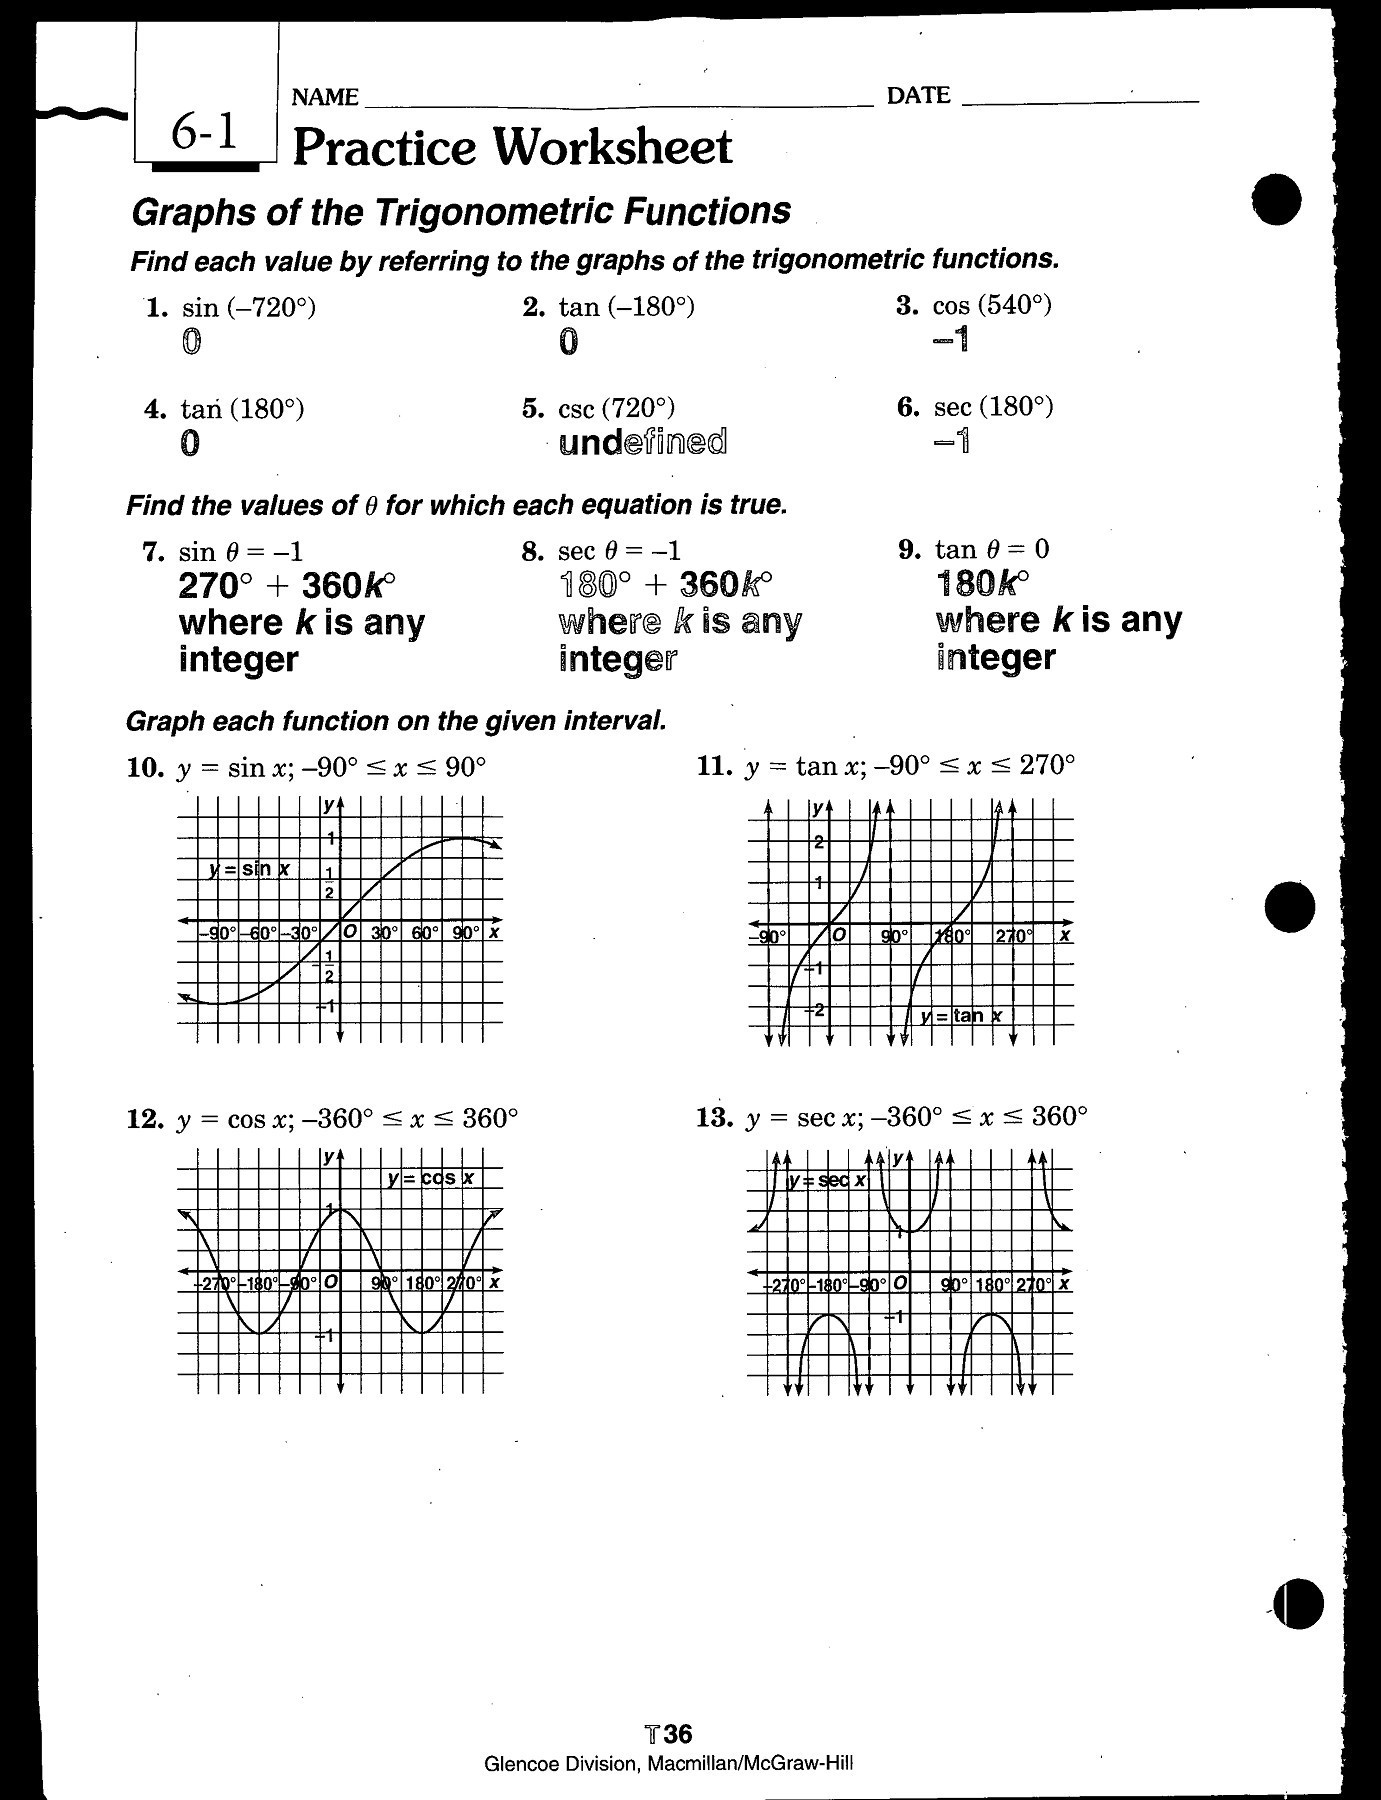 Graphing Trig Functions Practice Worksheet I Name Date 6 1 Practice W Rksheet Pages 1 24 Text